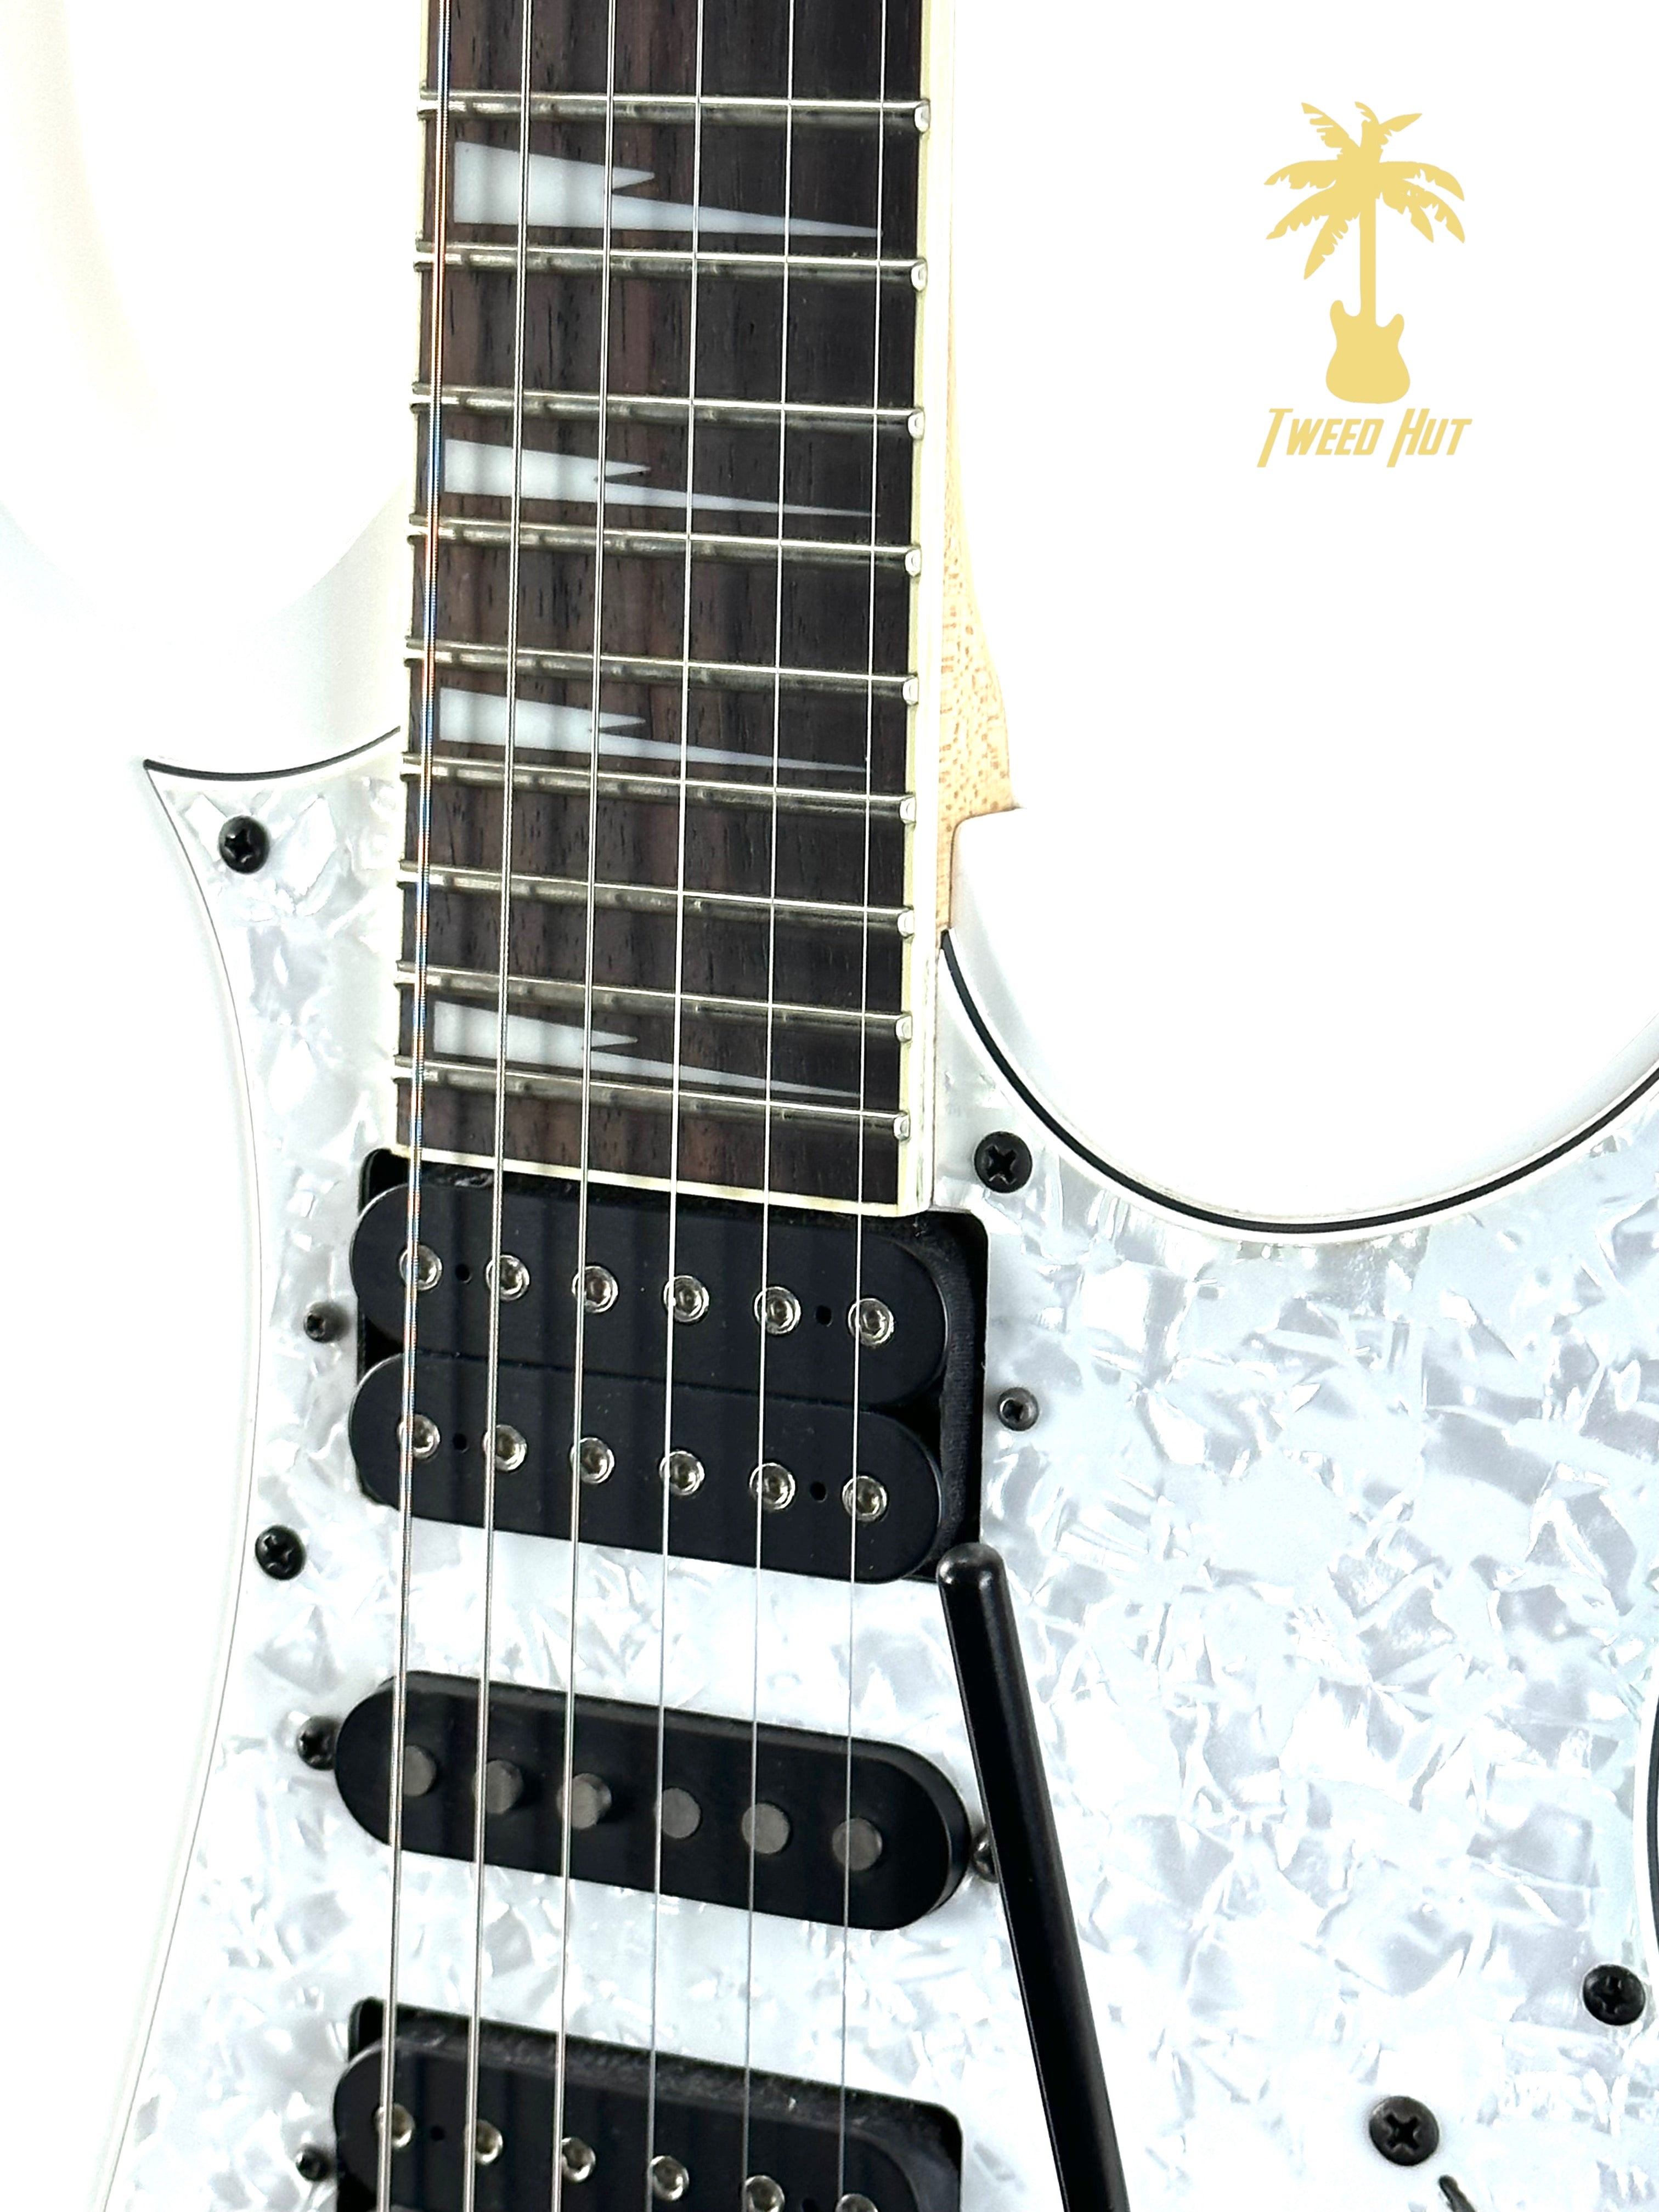 PRE-OWNED IBANEZ RG450DXB ELECTRIC - WHITE